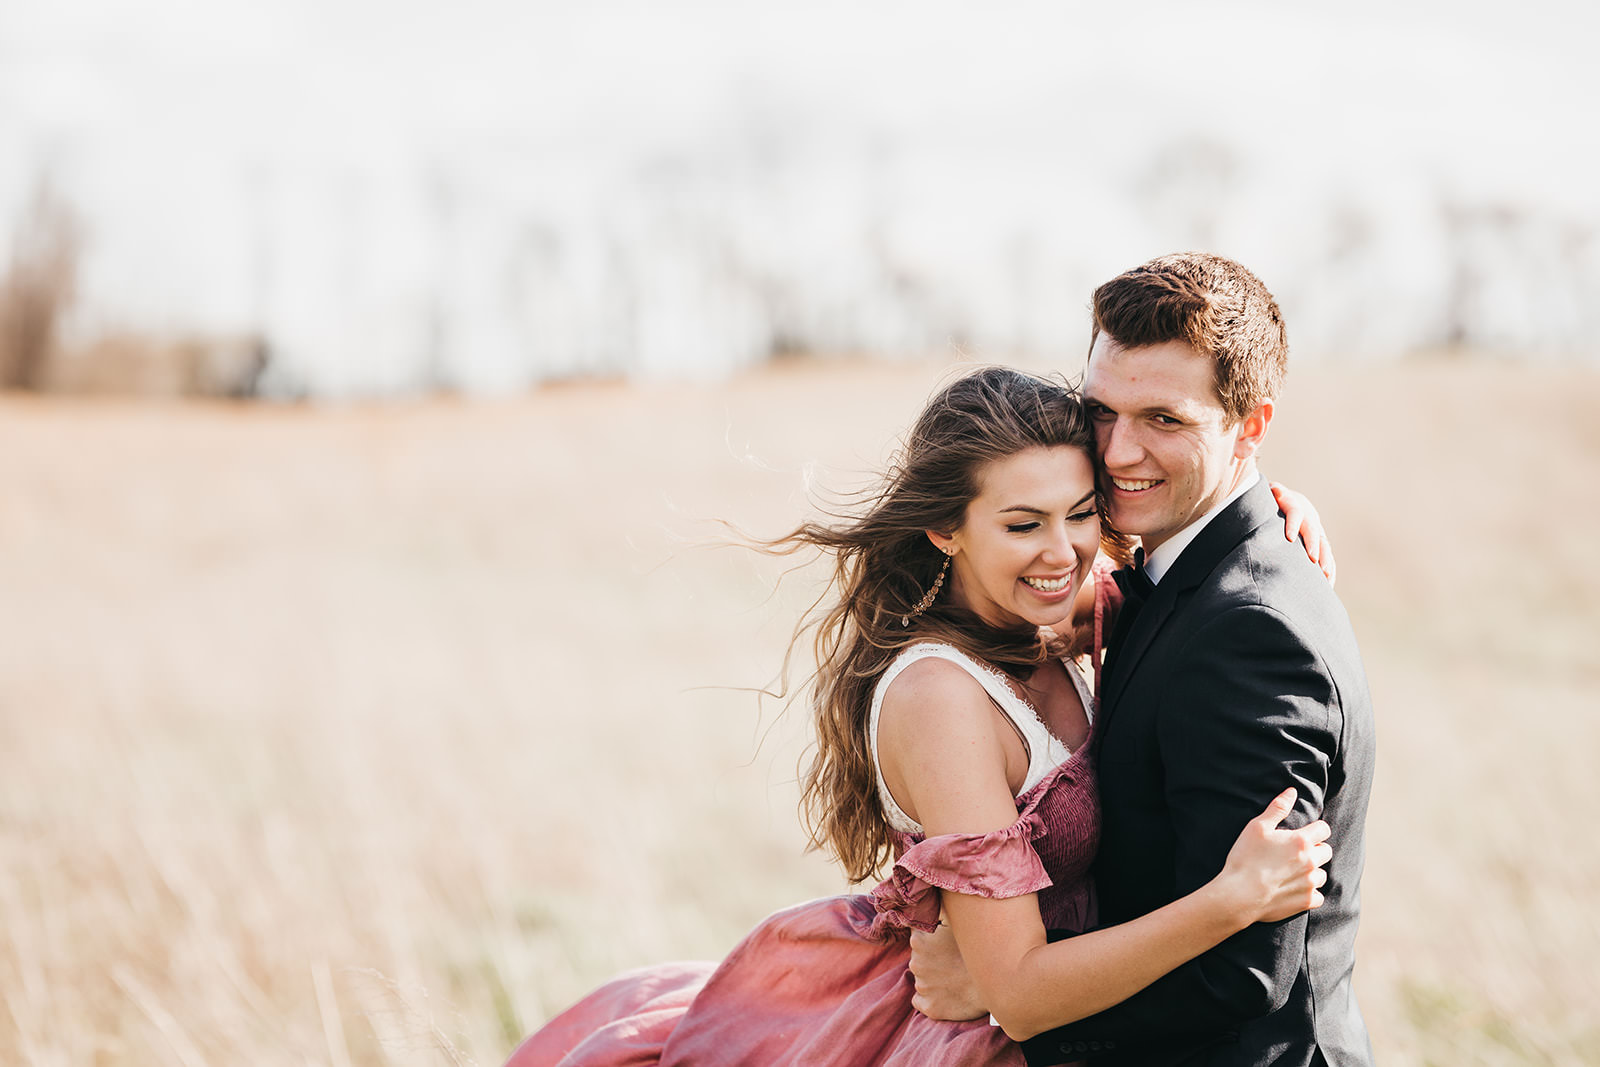 photo of a couple smiling and hugging